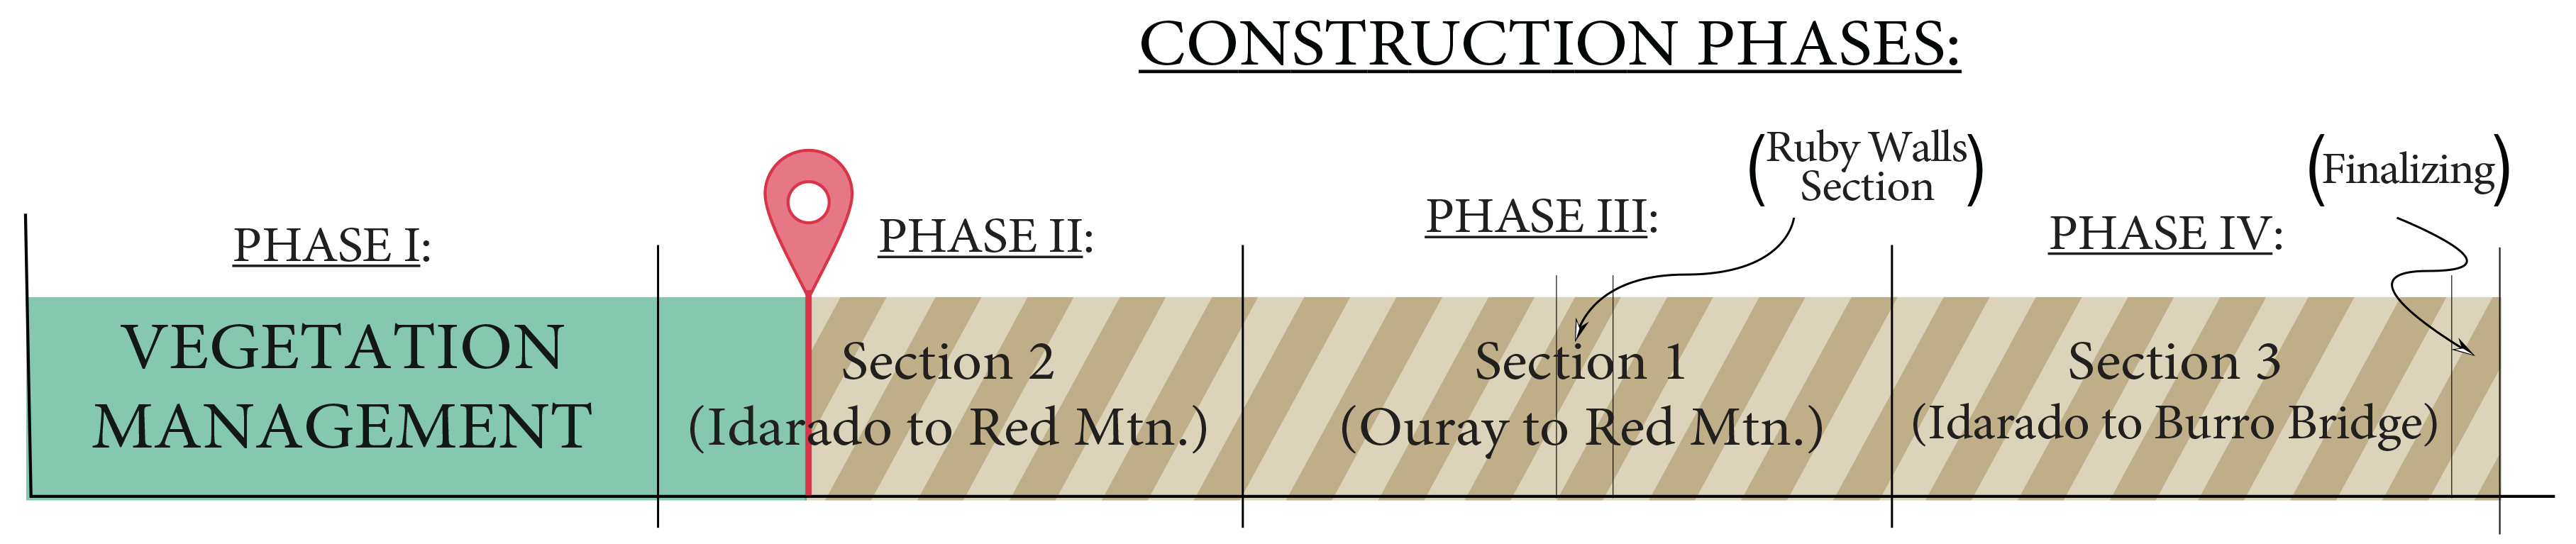 Project Timeline - Beginning Phase II